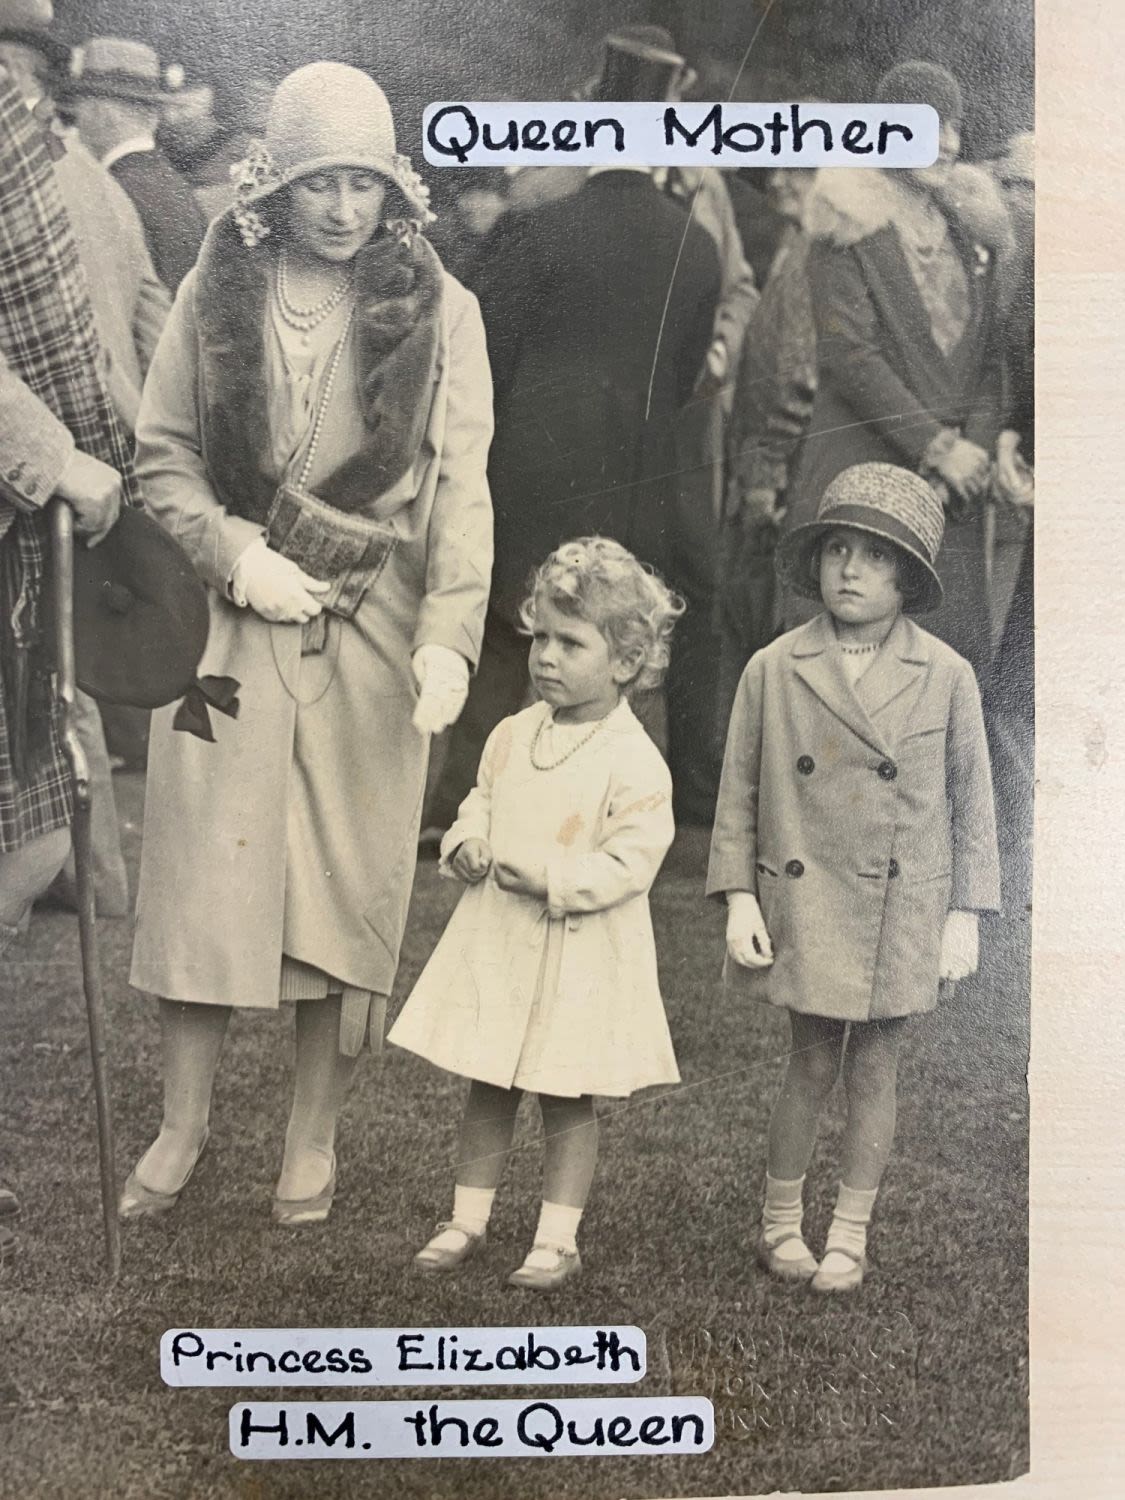 Photograph of The Princess Elizabeth with Queen Mother by Laings Studios in 1929 13x21 cm - Image 2 of 3